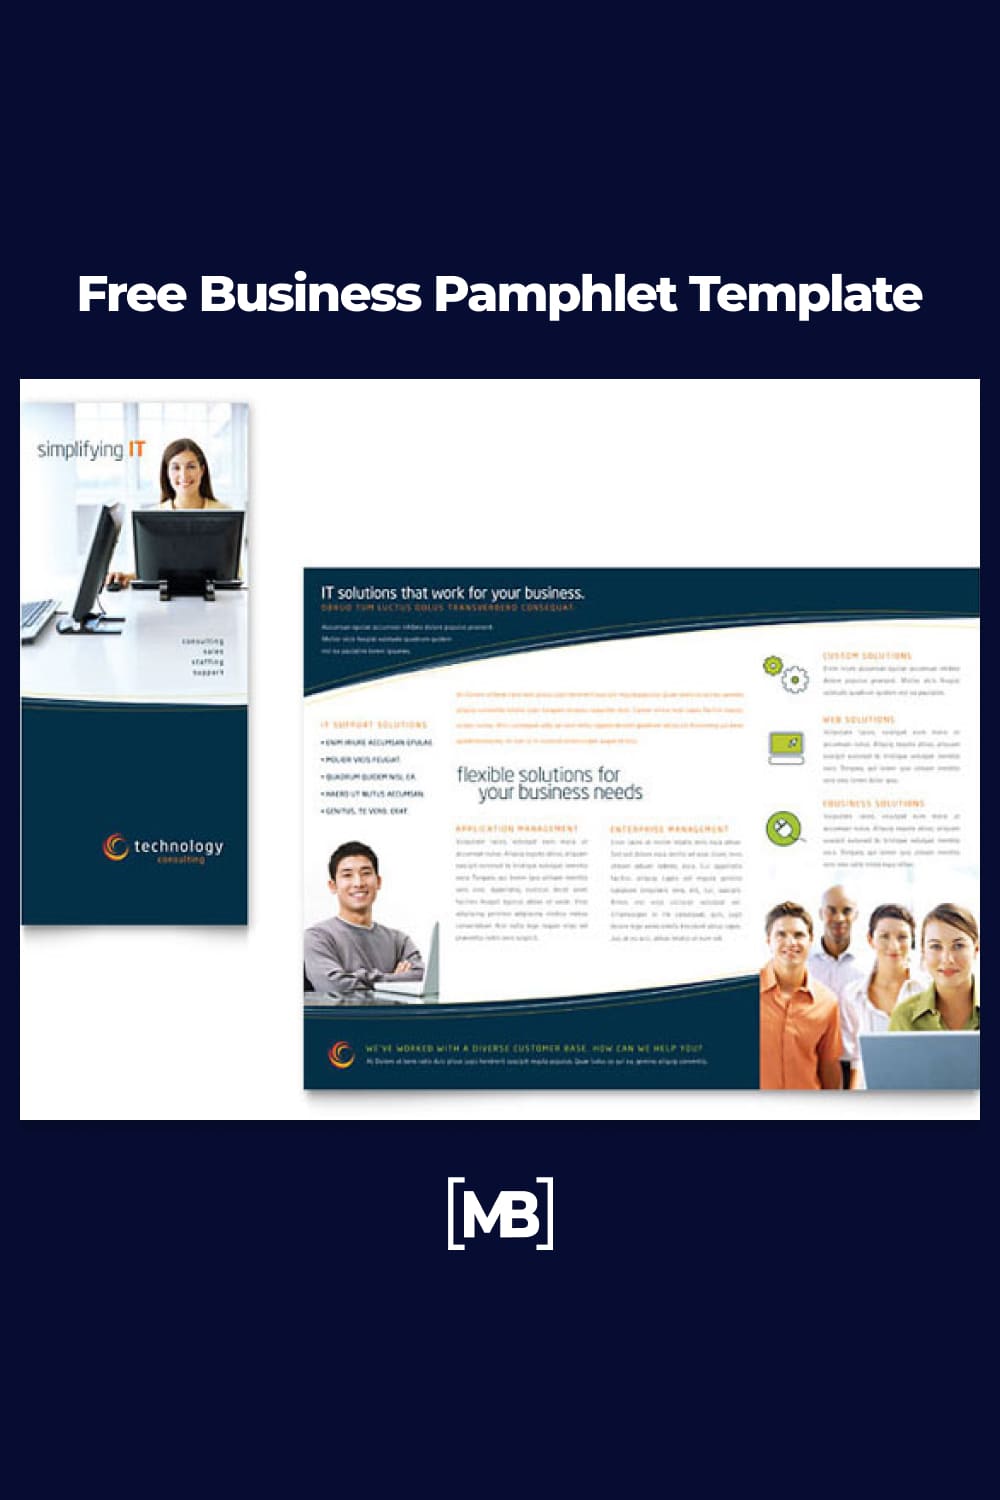 Business pamphlet template.